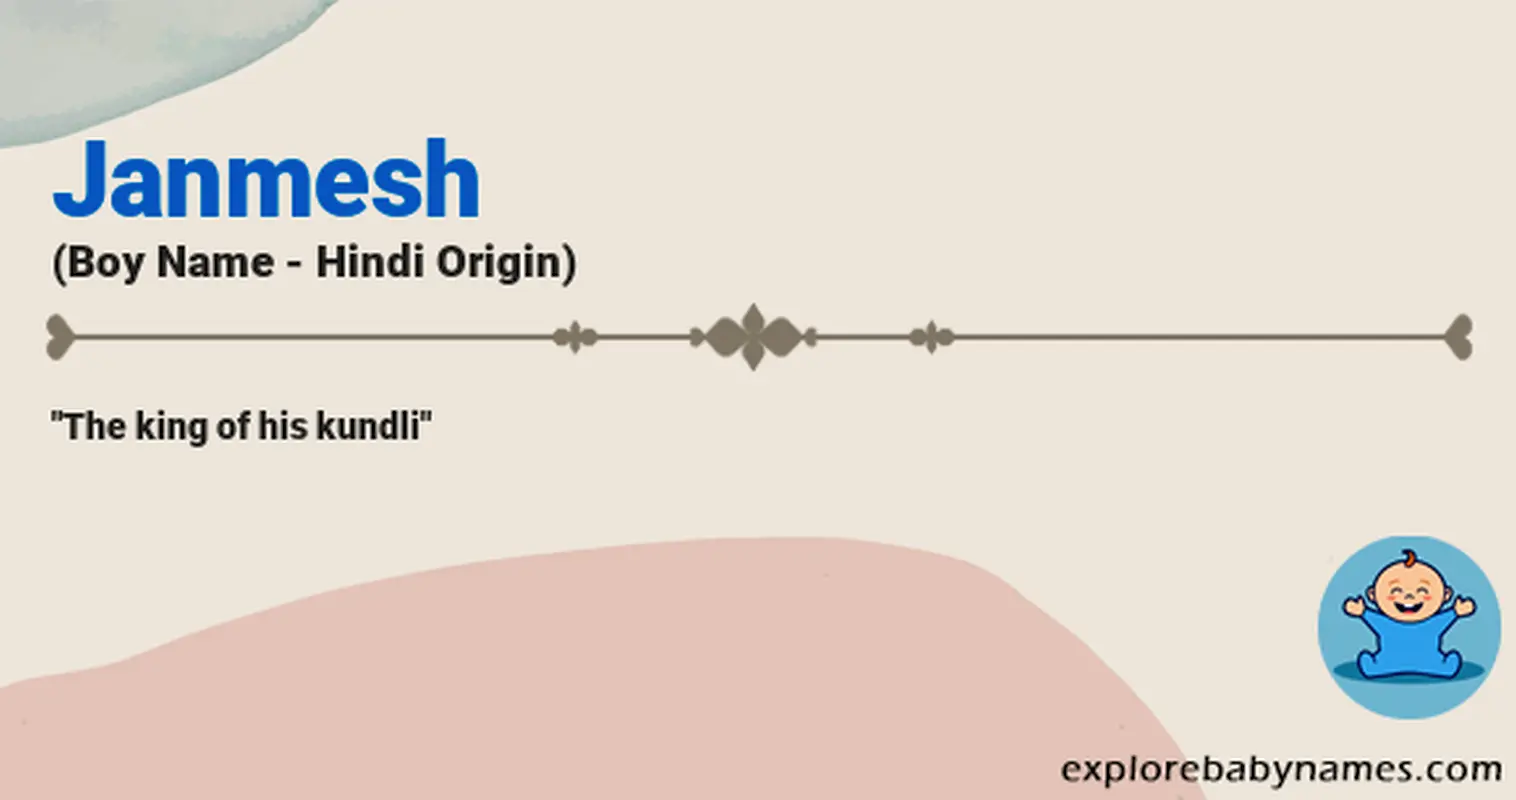 Meaning of Janmesh